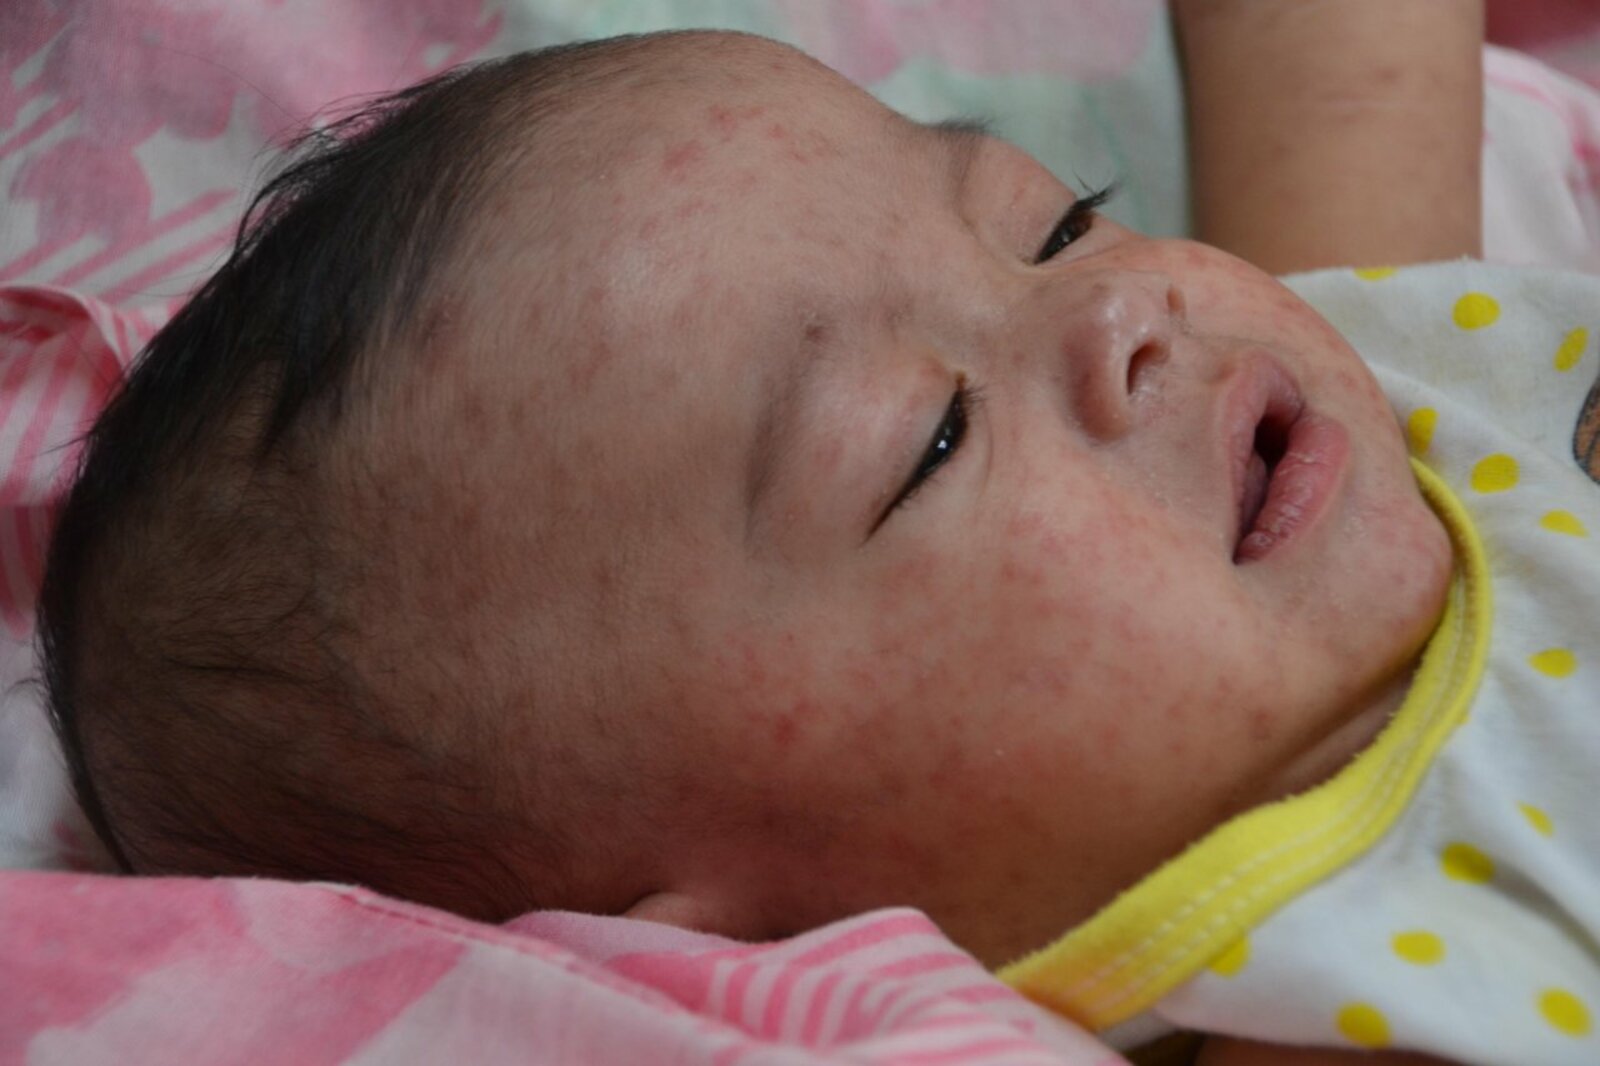 CDC Global - Measles is no joke, CC BY 2.0, https://commons.wikimedia.org/w/index.php?curid=76594880